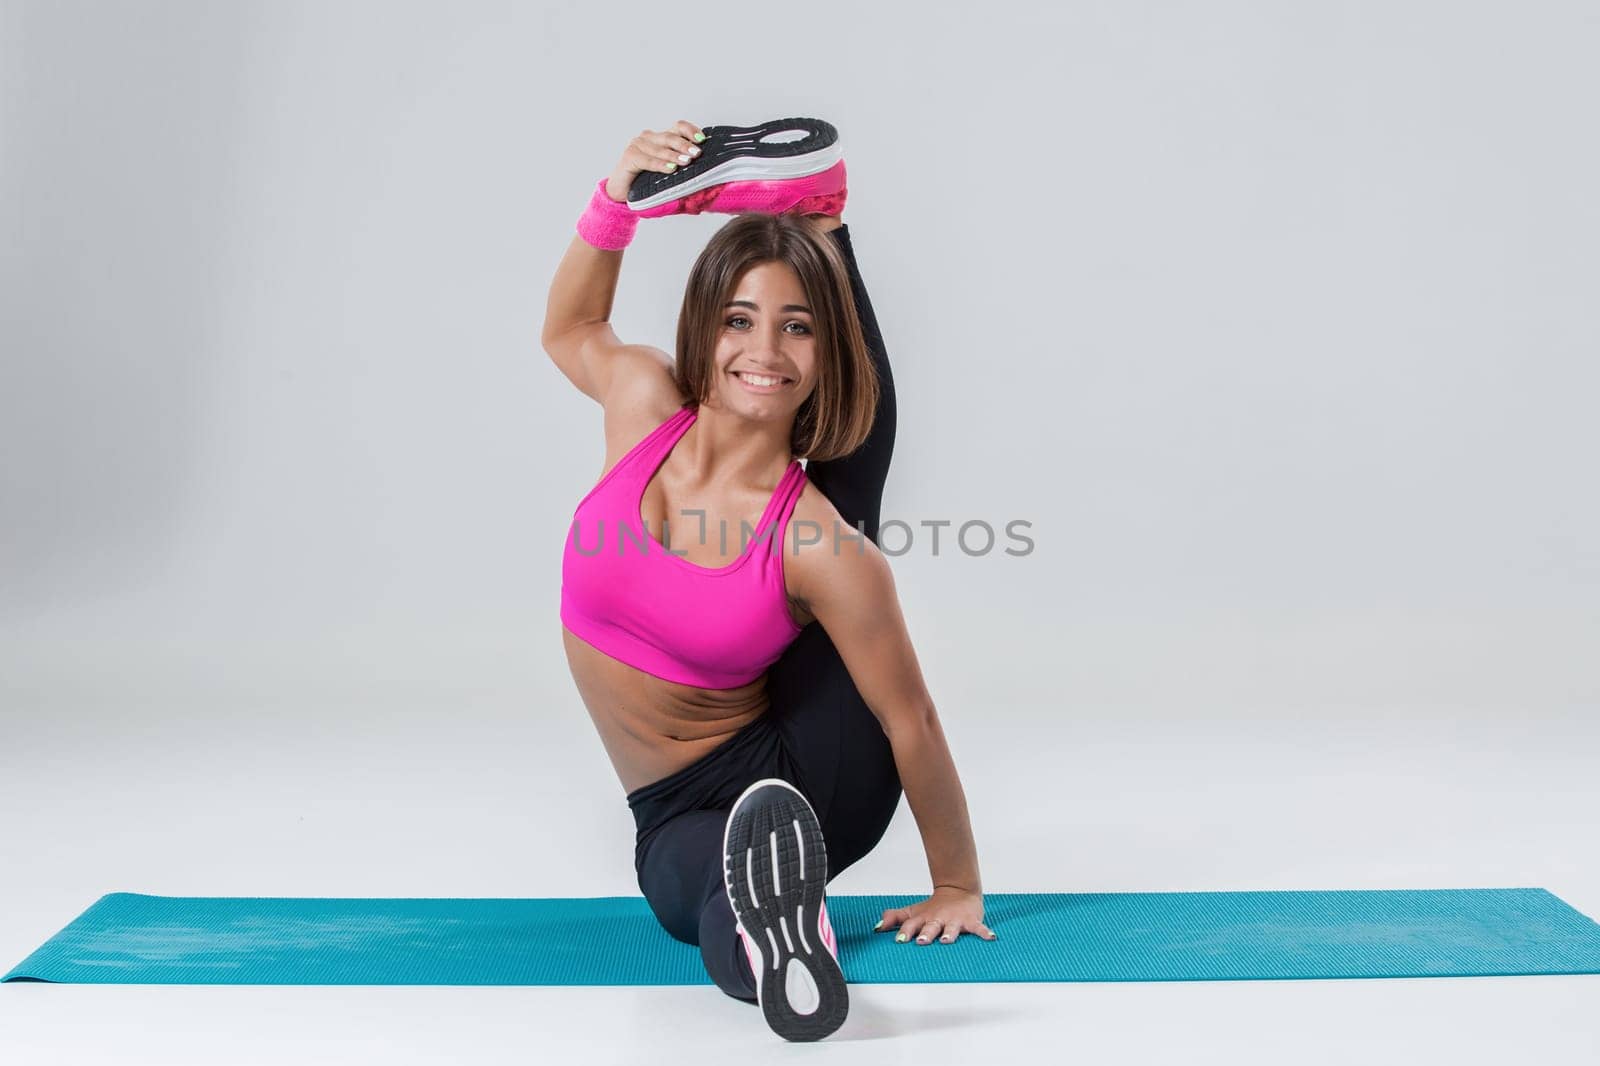 Sport and active lifestyle. Sporty flexible girl fitness woman in pink sportswear doing stretching exercise on light background.